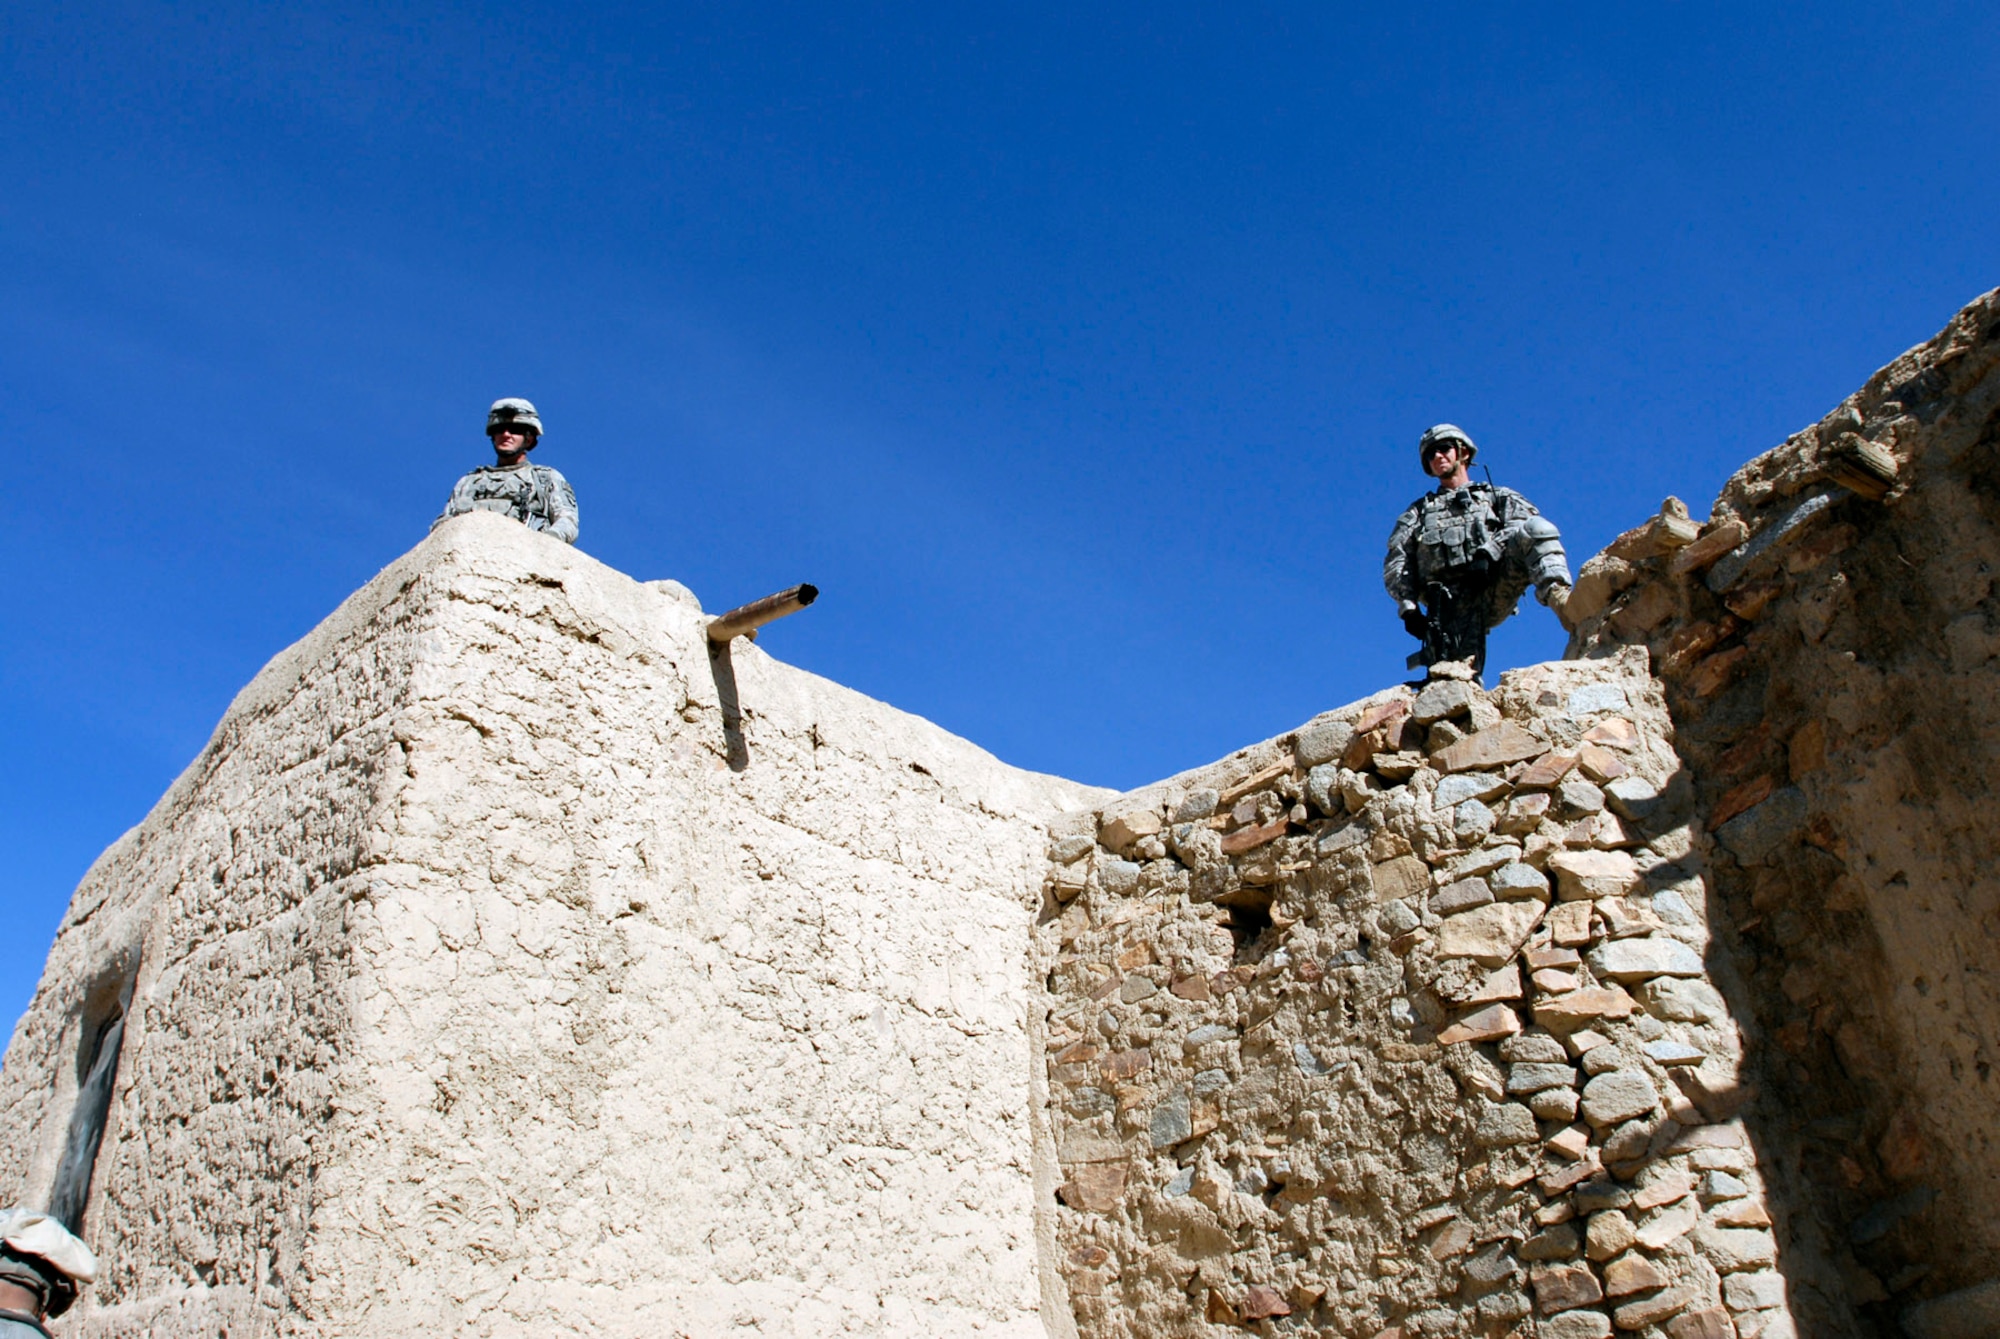 Soldiers with Alpha Company, 101st Division Special Troops Battalion, 101st Airborne Division, survey the area from a roof top in a small village, Nov. 4, 2008.  They, and more than 100 other 101st Soldiers air assaulted into a narrow valley and searched a village for IED making materials and facilities.  (Photo by Spc. Mary L. Gonzalez, CJTF-101 Public Affairs)